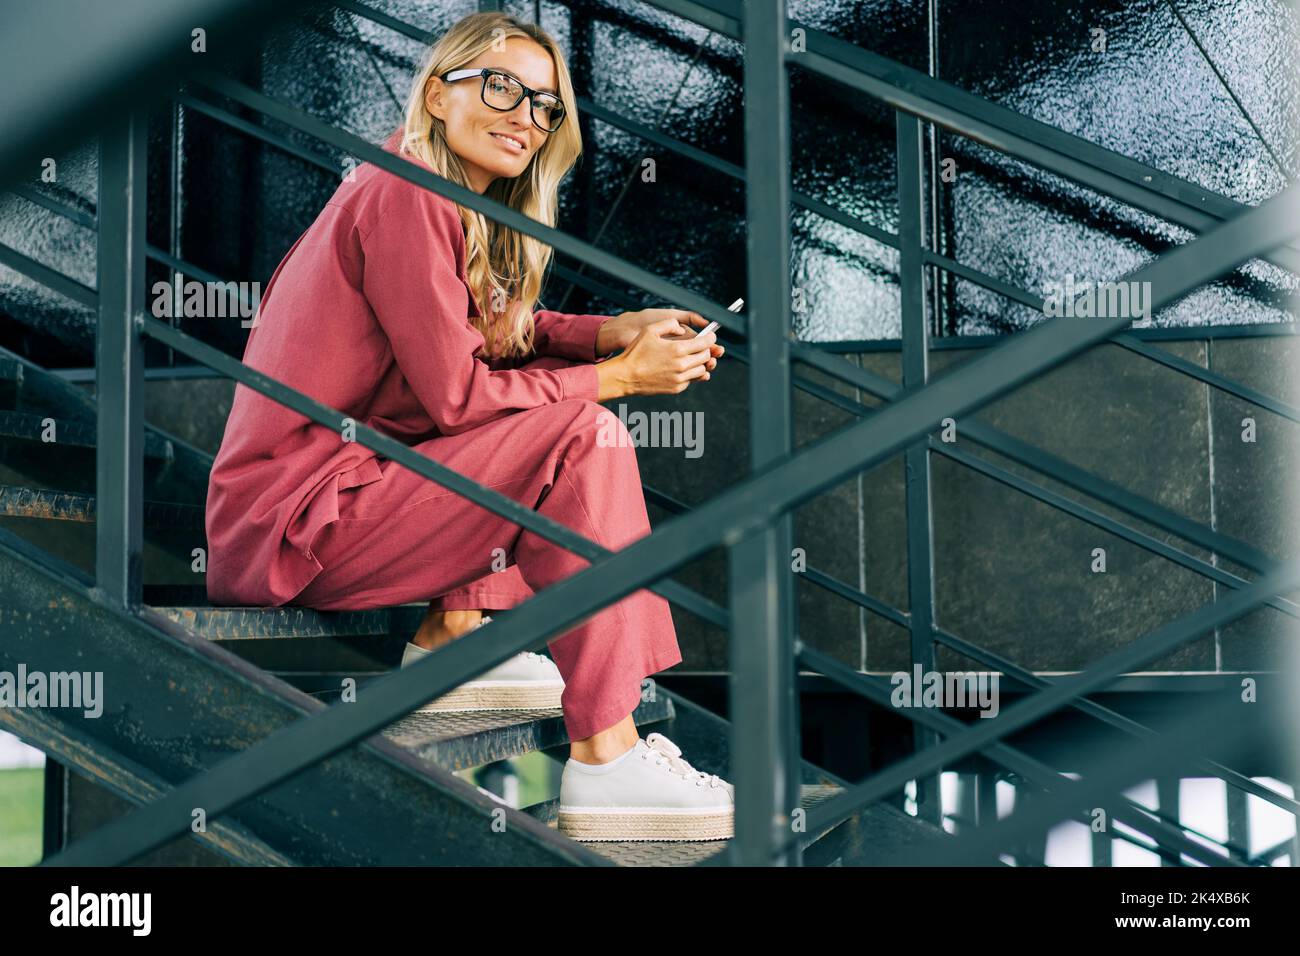 Portrait of a young business woman sitting on a step and using the phone. Stock Photo